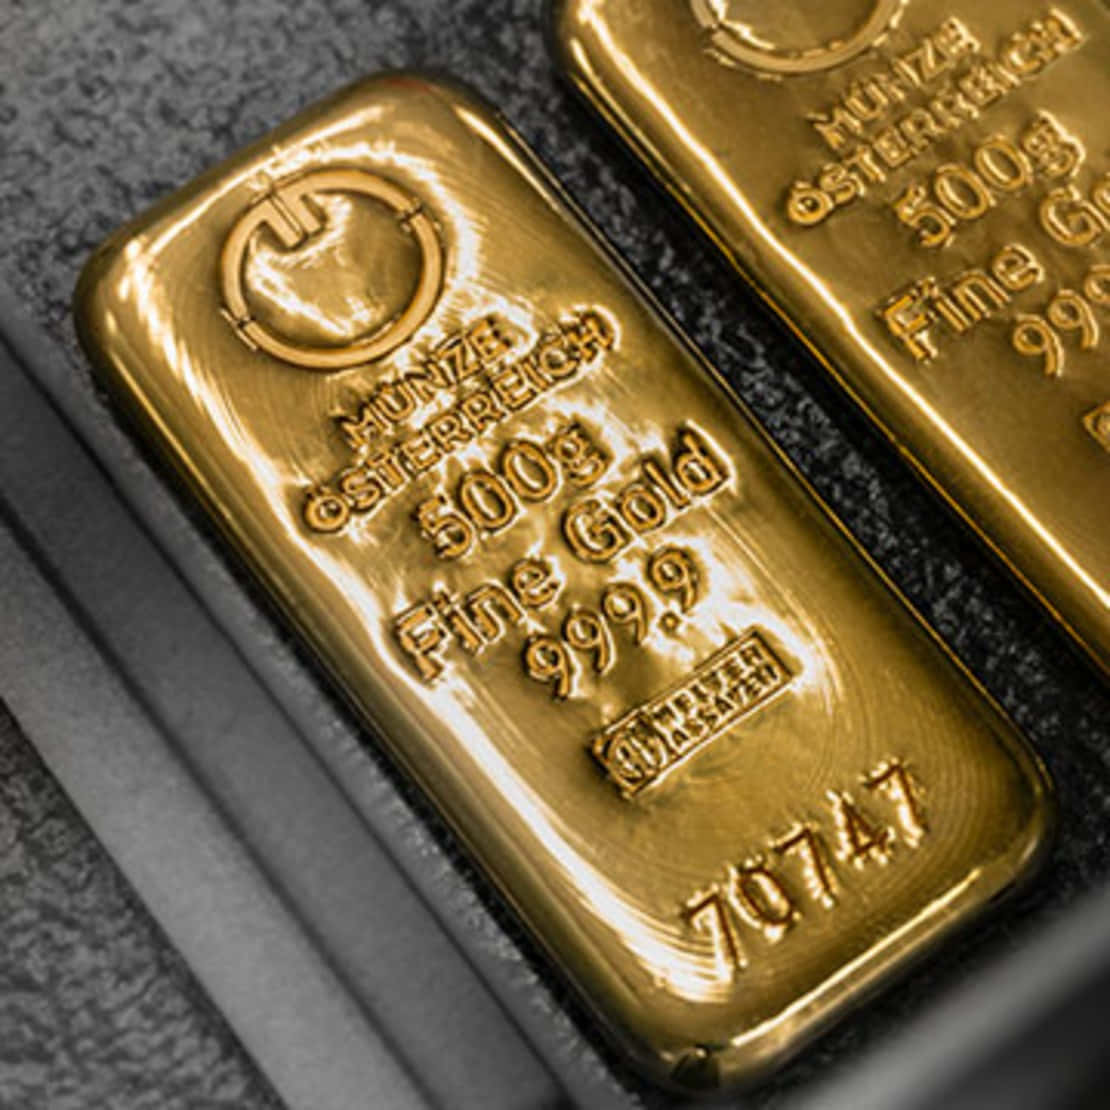 Gold Bars In A Case